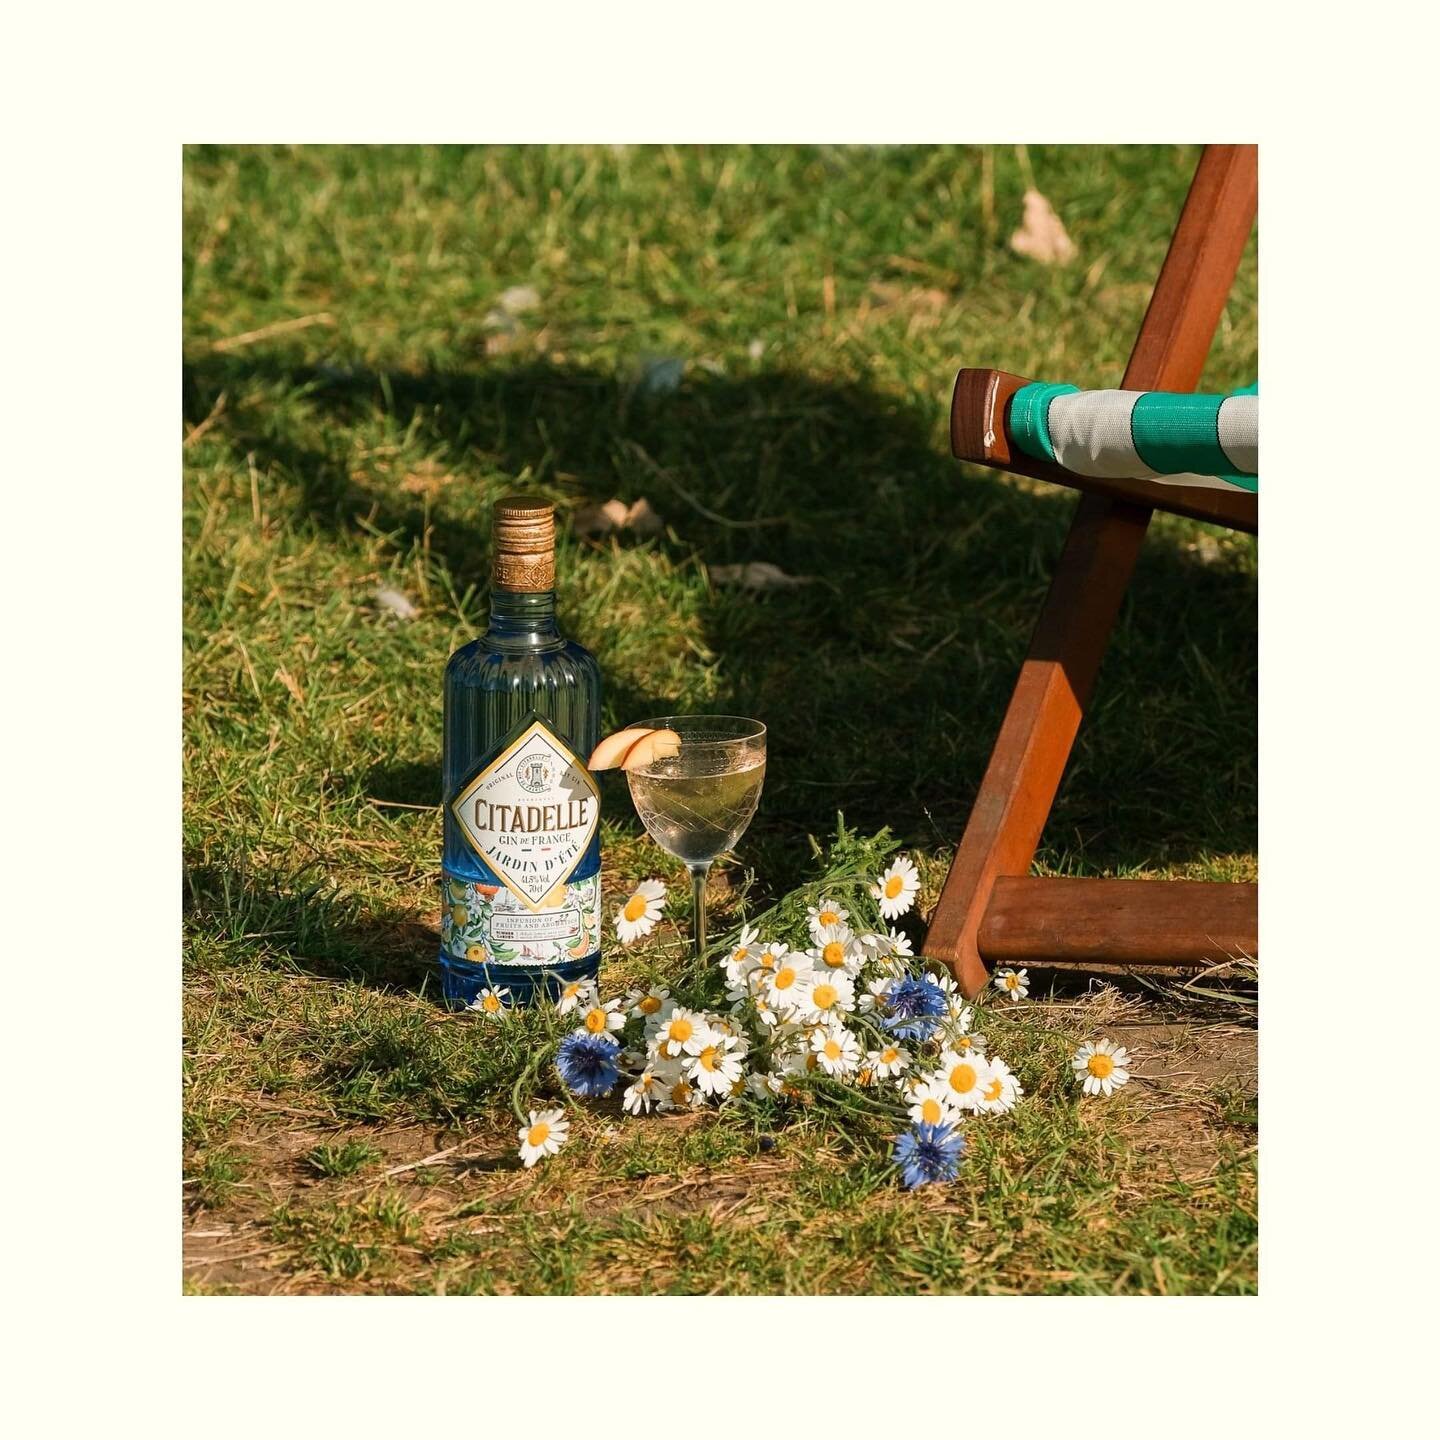 𝐻𝐴𝑃𝑃𝑌 𝑊𝑂𝑅𝐿𝐷 𝐺𝐼𝑁 𝐷𝐴𝑌 🍸💛

A celebration of that delightful Juniper infused spirit, founded by the amazing @ginmonkeyuk 

So we invite you all to raise a glass of Citadelle to toast Emma and the gin we all love. - 𝑺𝒂𝒏𝒕𝒆́ 

Our lit